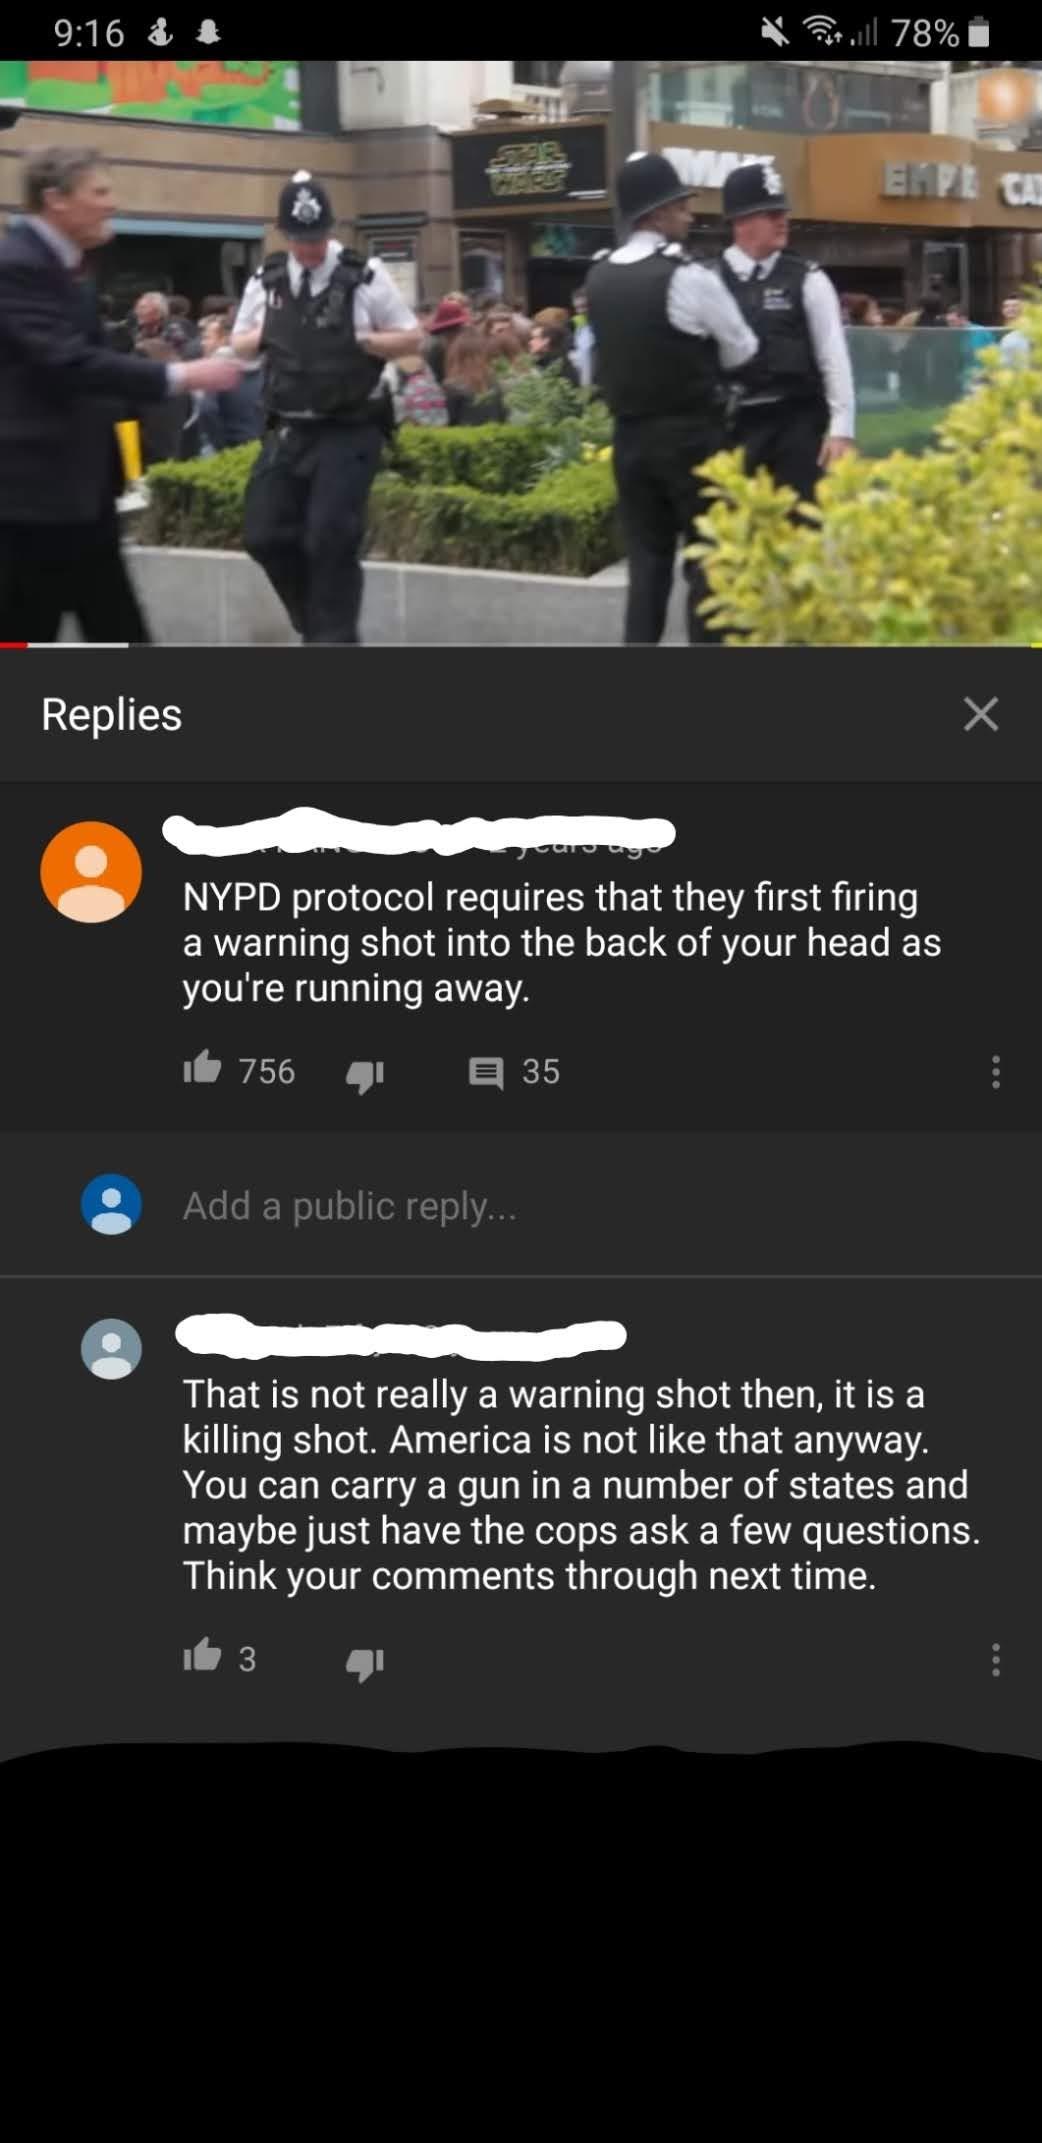 missed - screenshot - & Petill 78% El Pl Tai Replies avu. Nypd protocol requires that they first firing a warning shot into the back of your head as you're running away. 16 756 35 Add a public ... That is not really a warning shot then, it is a killing sh